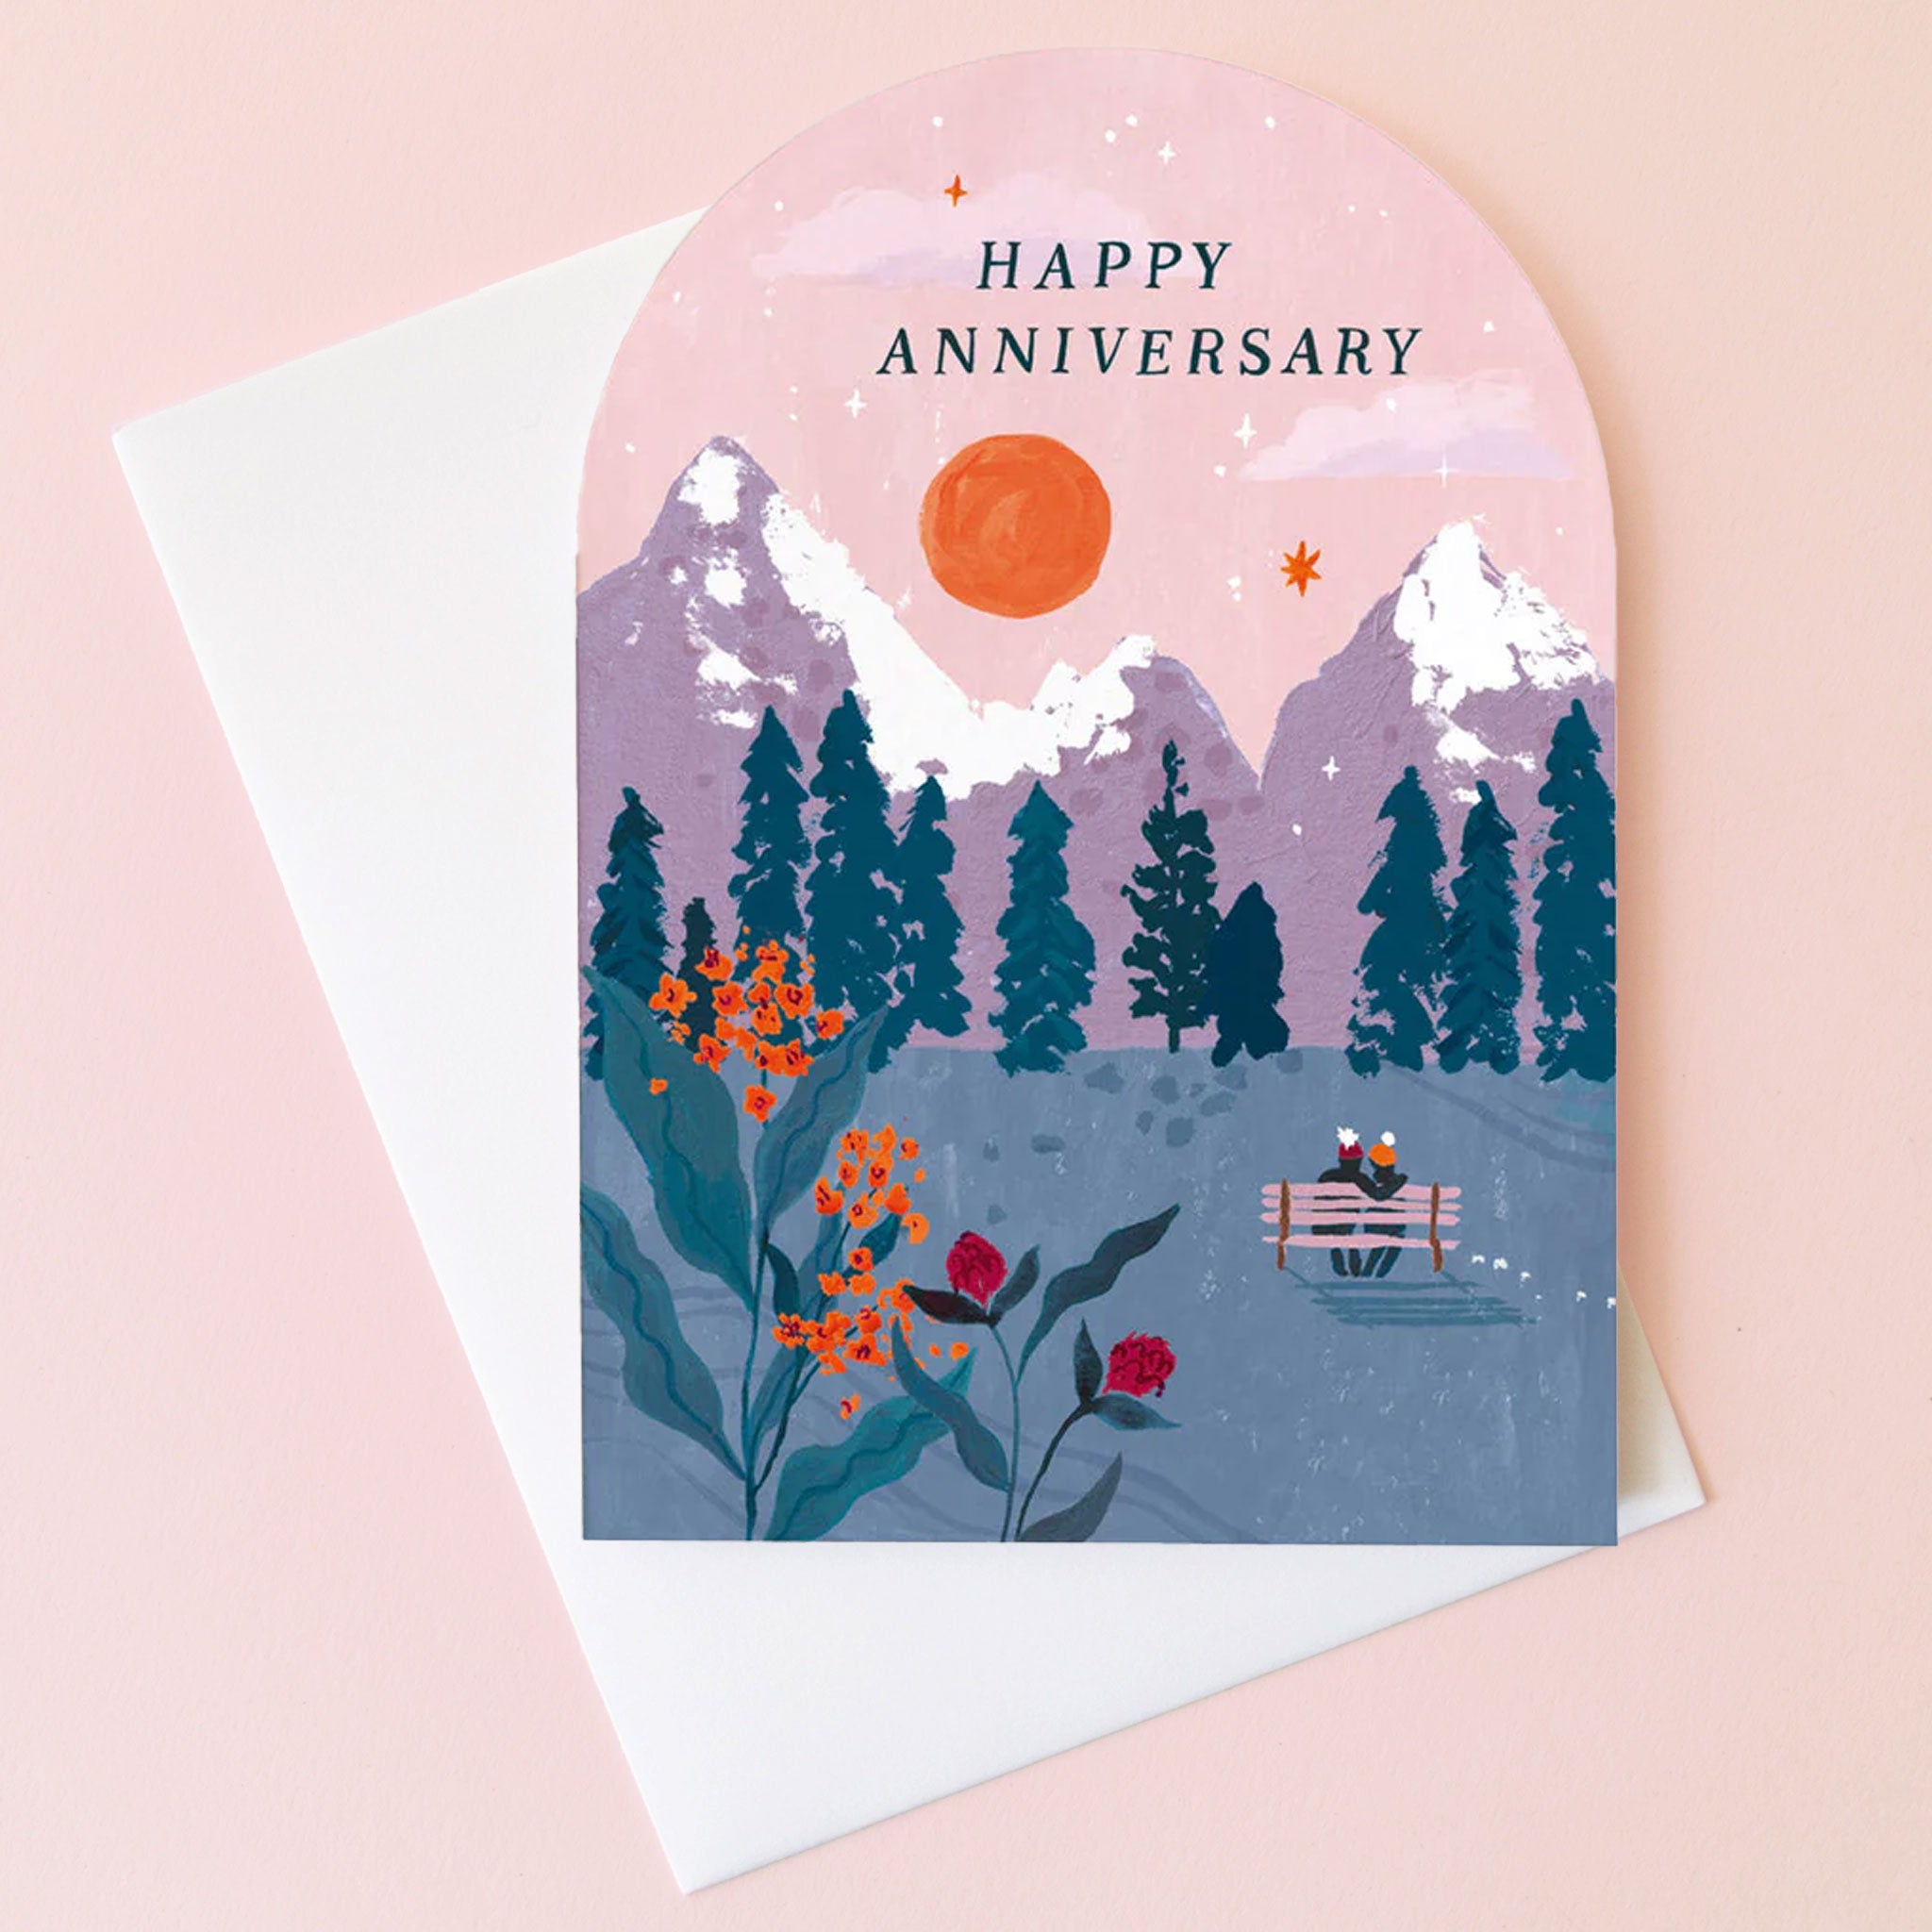 On a pink background is an arched card with a mountainous illustration and text at the top that reads, "Happy Anniversary". 